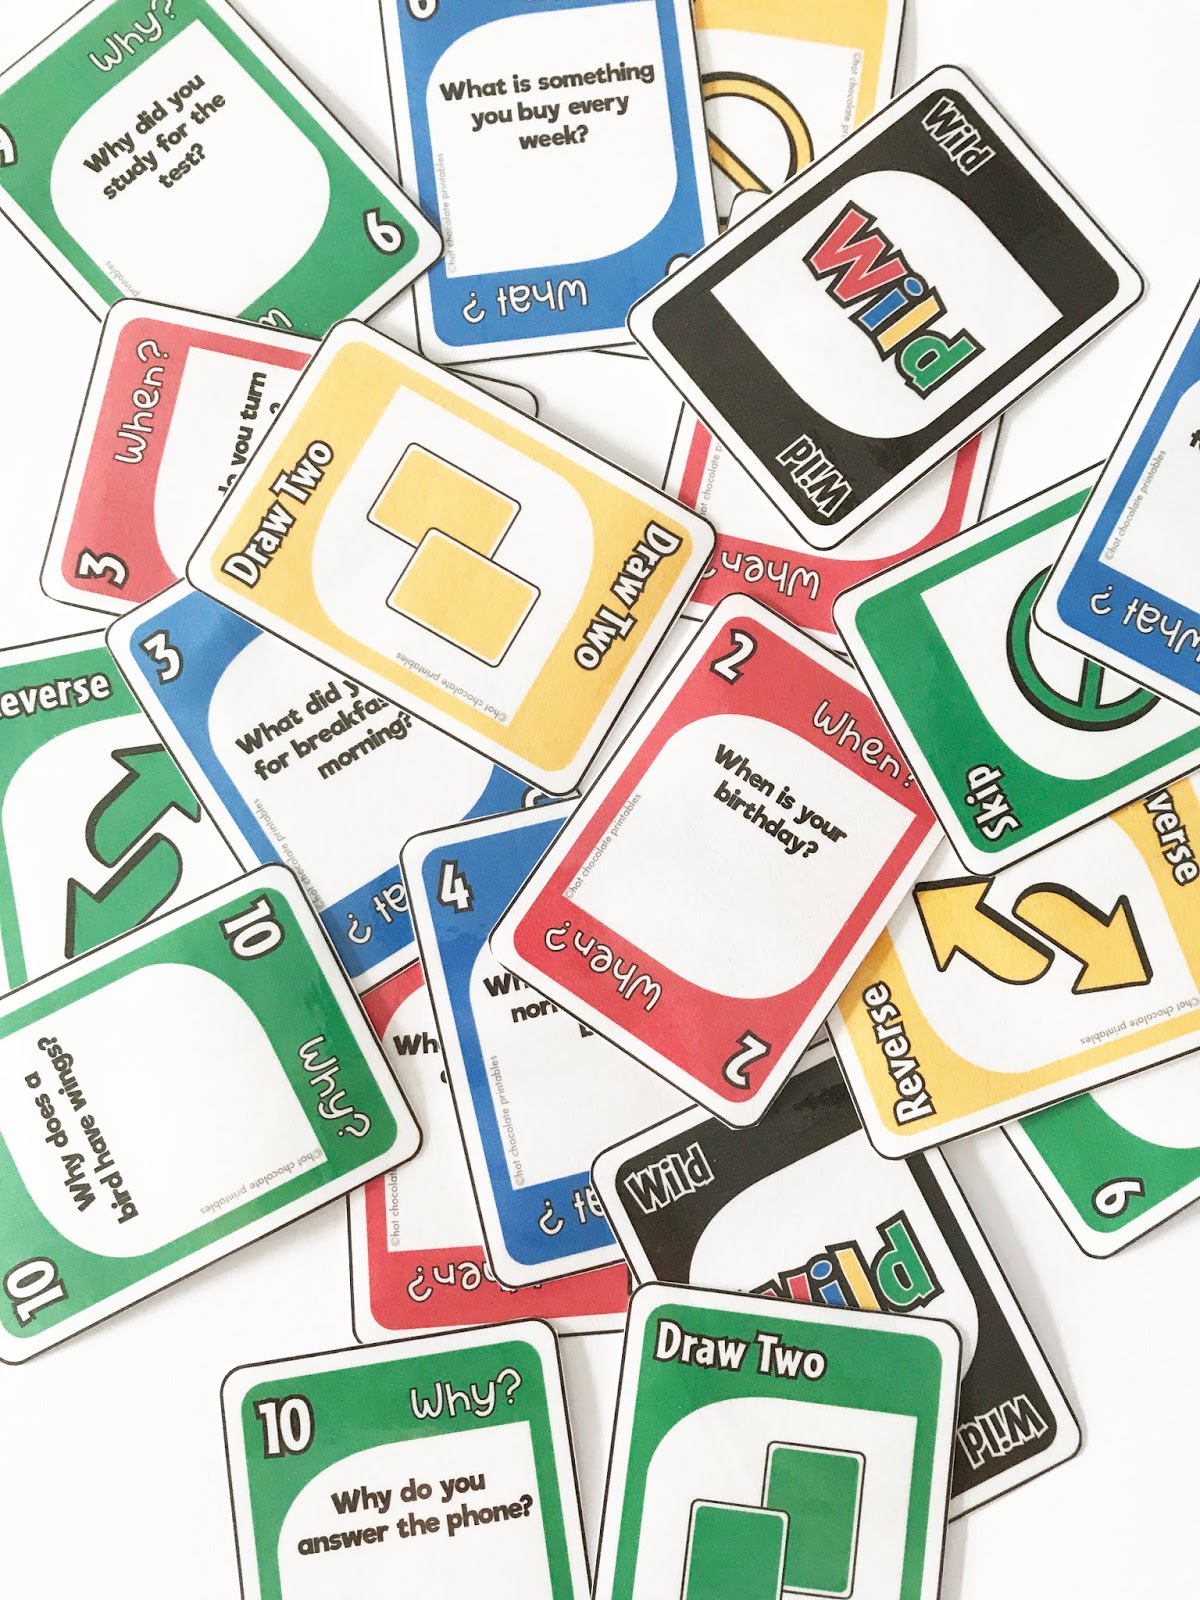 grammar-based-card-games-to-get-your-students-speaking-hot